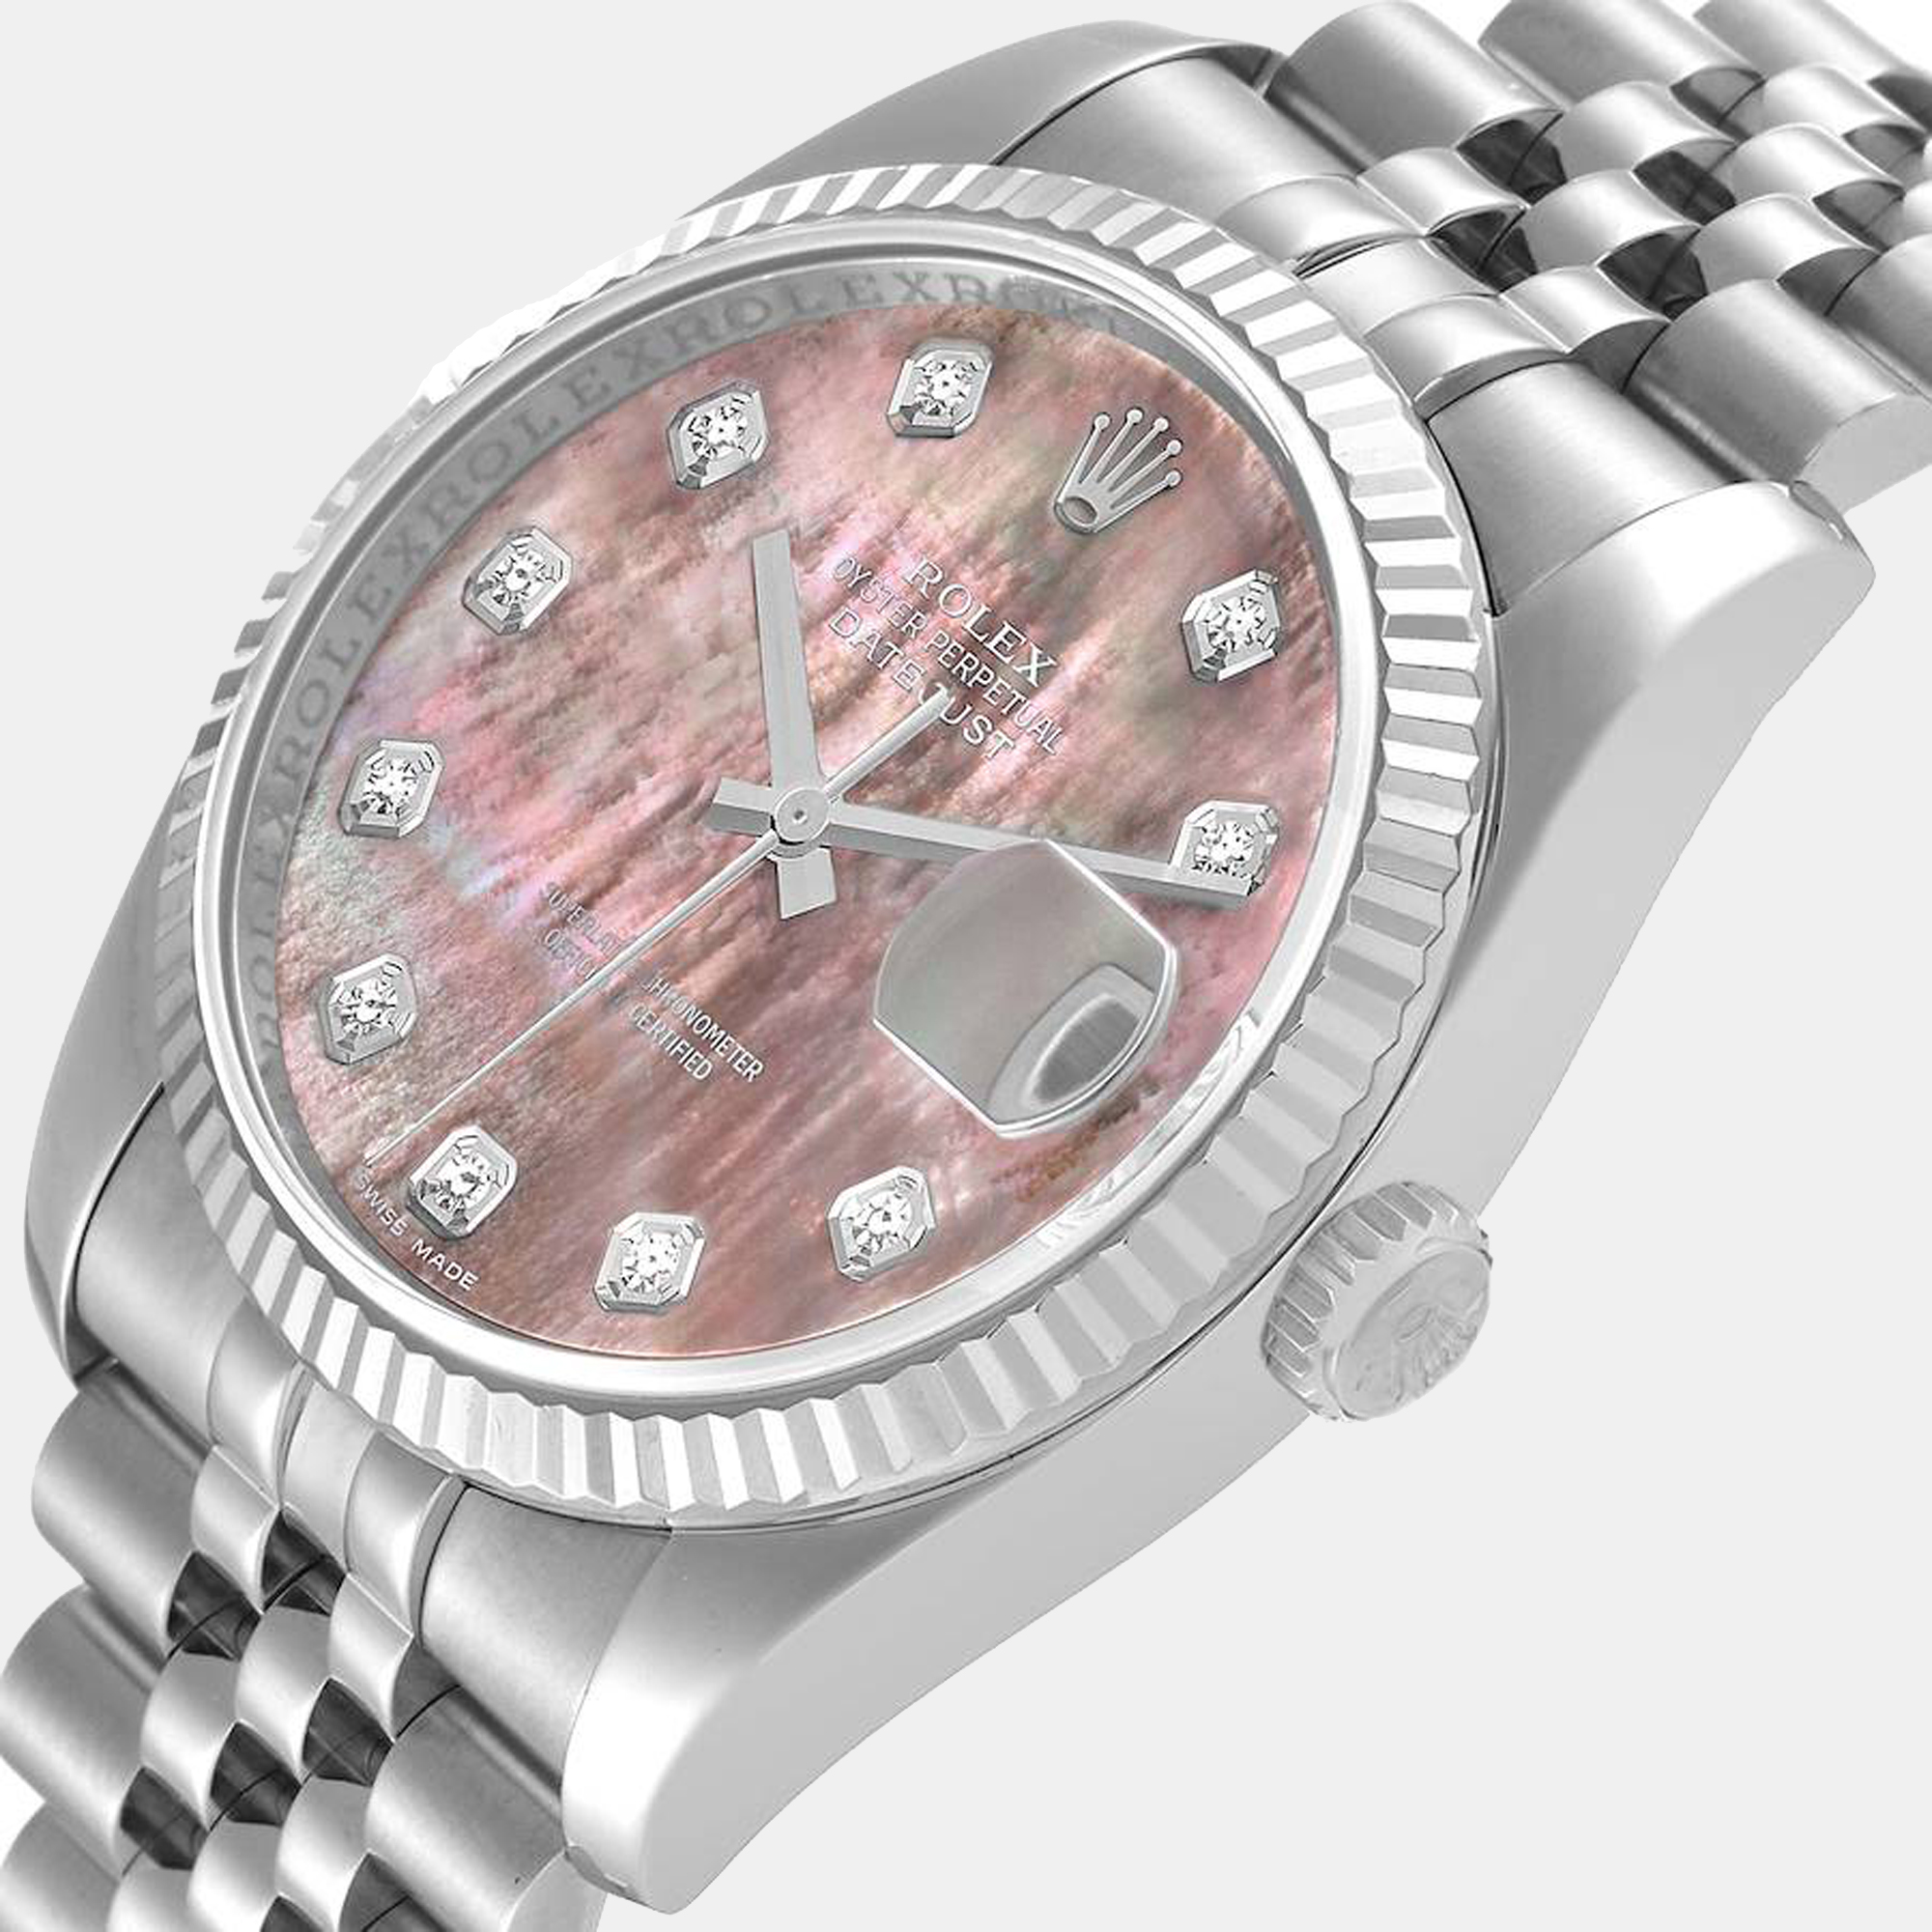 

Rolex MOP Diamonds 18k White Gold And Stainless Steel Datejust 116234 Men's Wristwatch 36 mm, Pink